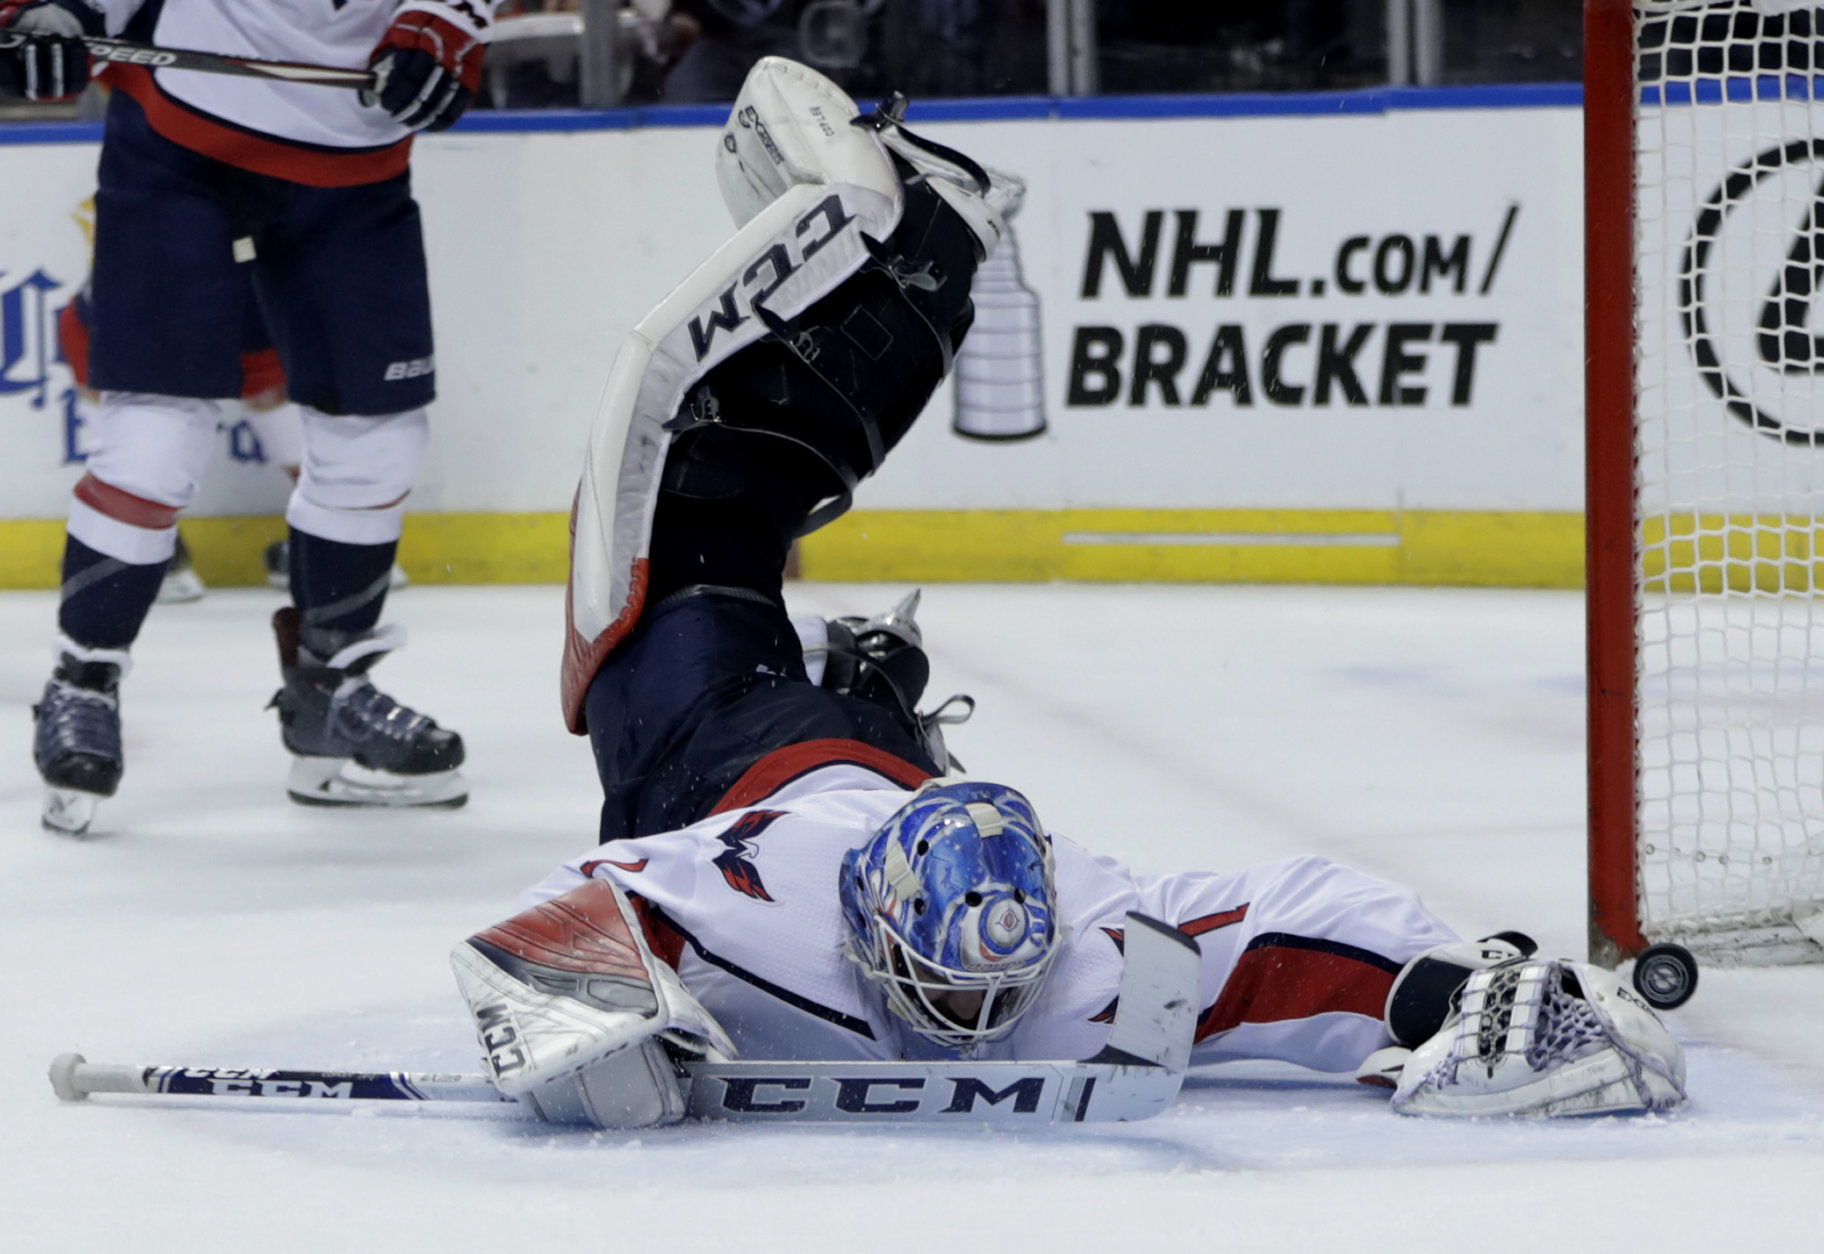 The puck gets past Washington Capitals goaltender Pheonix Copley for a goal scored by Florida Panthers right wing Troy Brouwer during the second period of an NHL hockey game, Monday, April 1, 2019, in Sunrise, Fla. (AP Photo/Lynne Sladky)